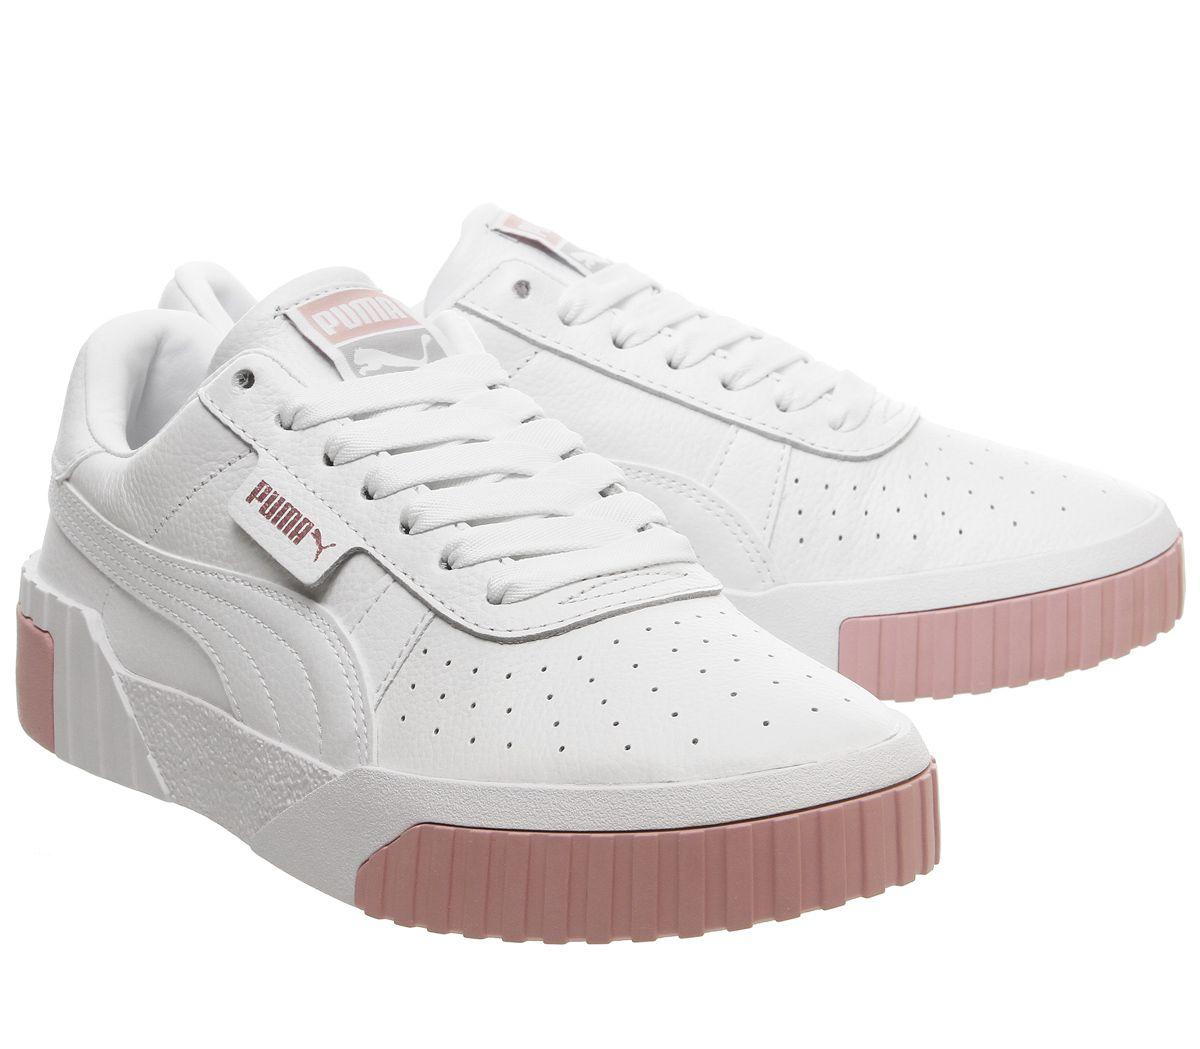 PUMA Leather Cali Trainers in White - Lyst